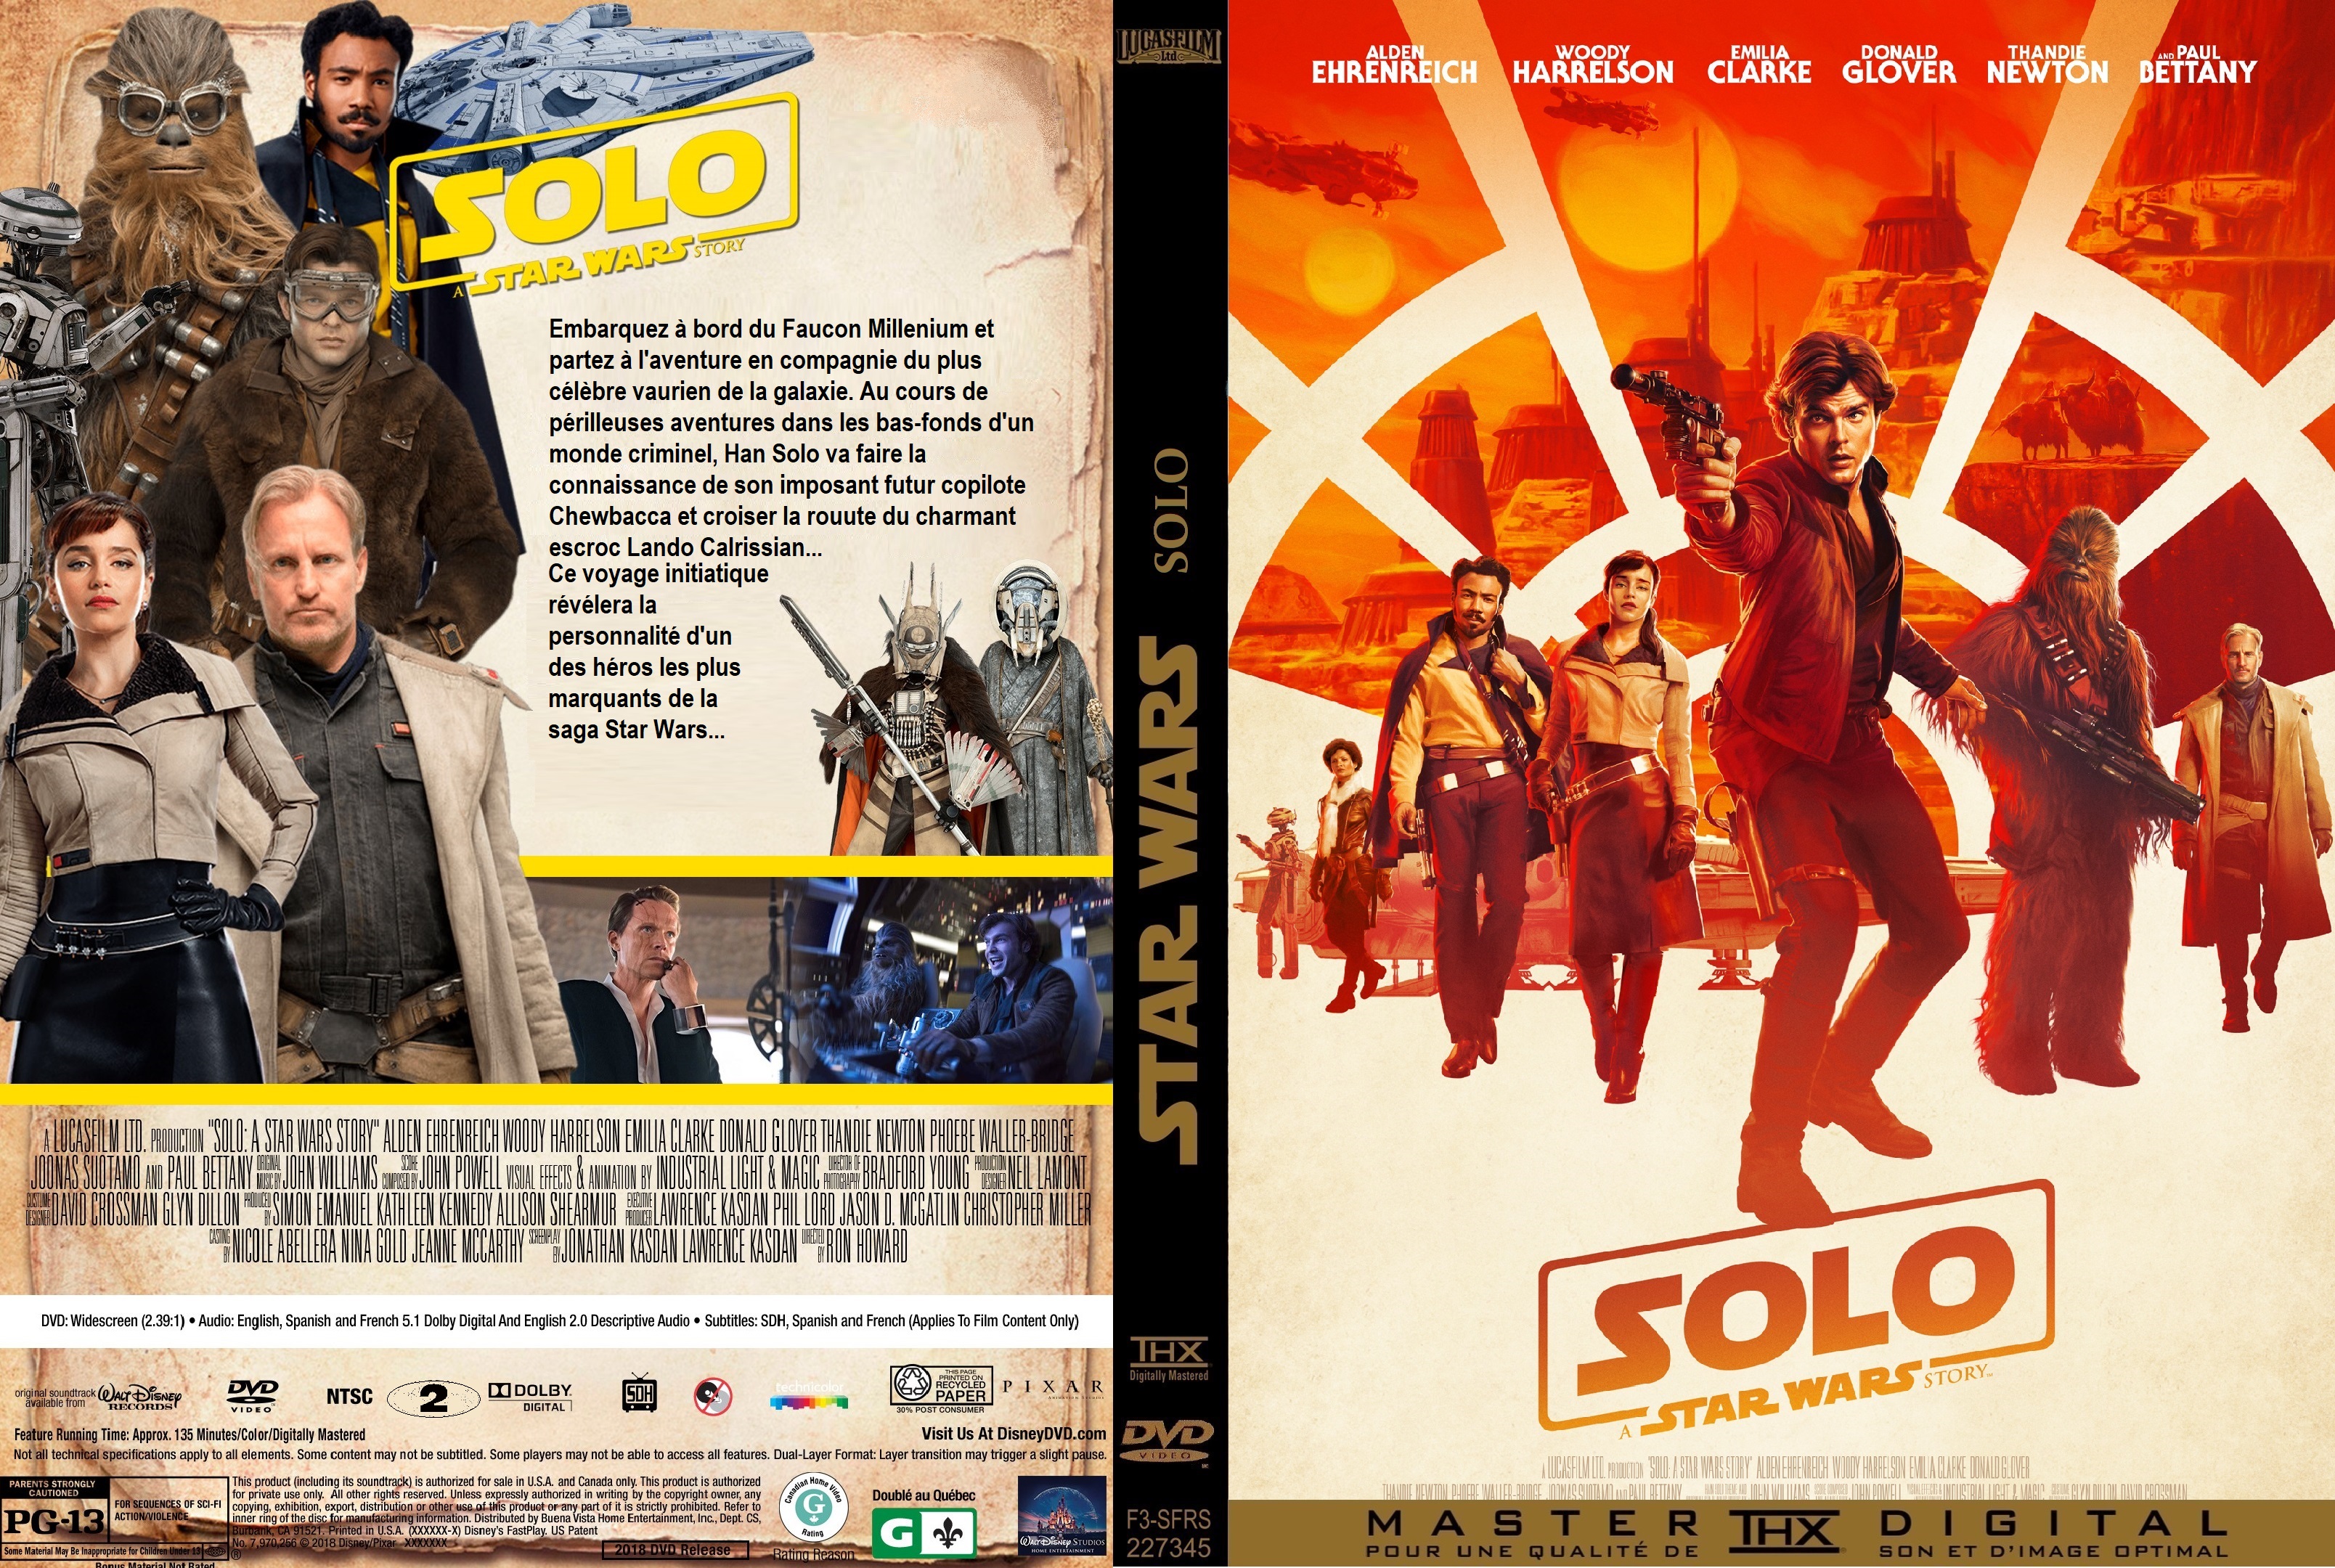 Jaquette DVD Solo: A Star Wars Story custom